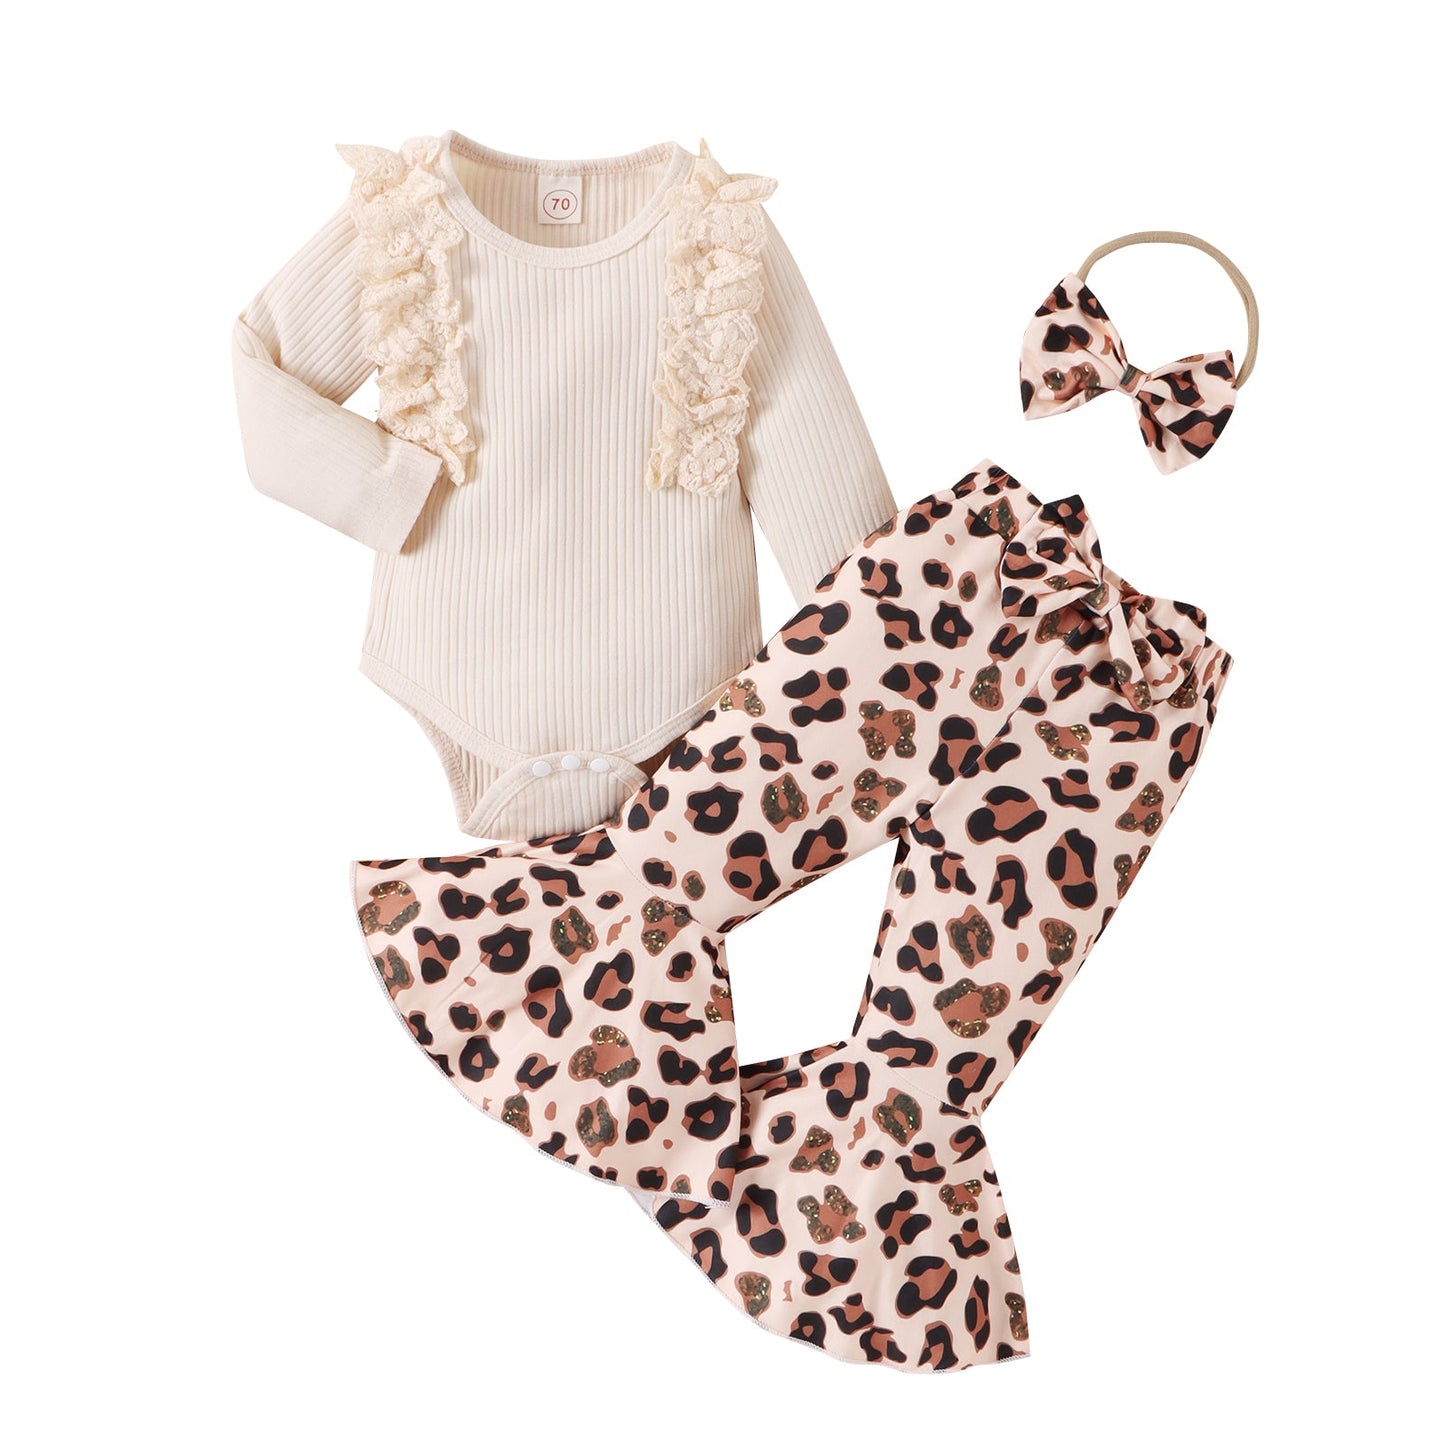 3-Piece Baby Sets